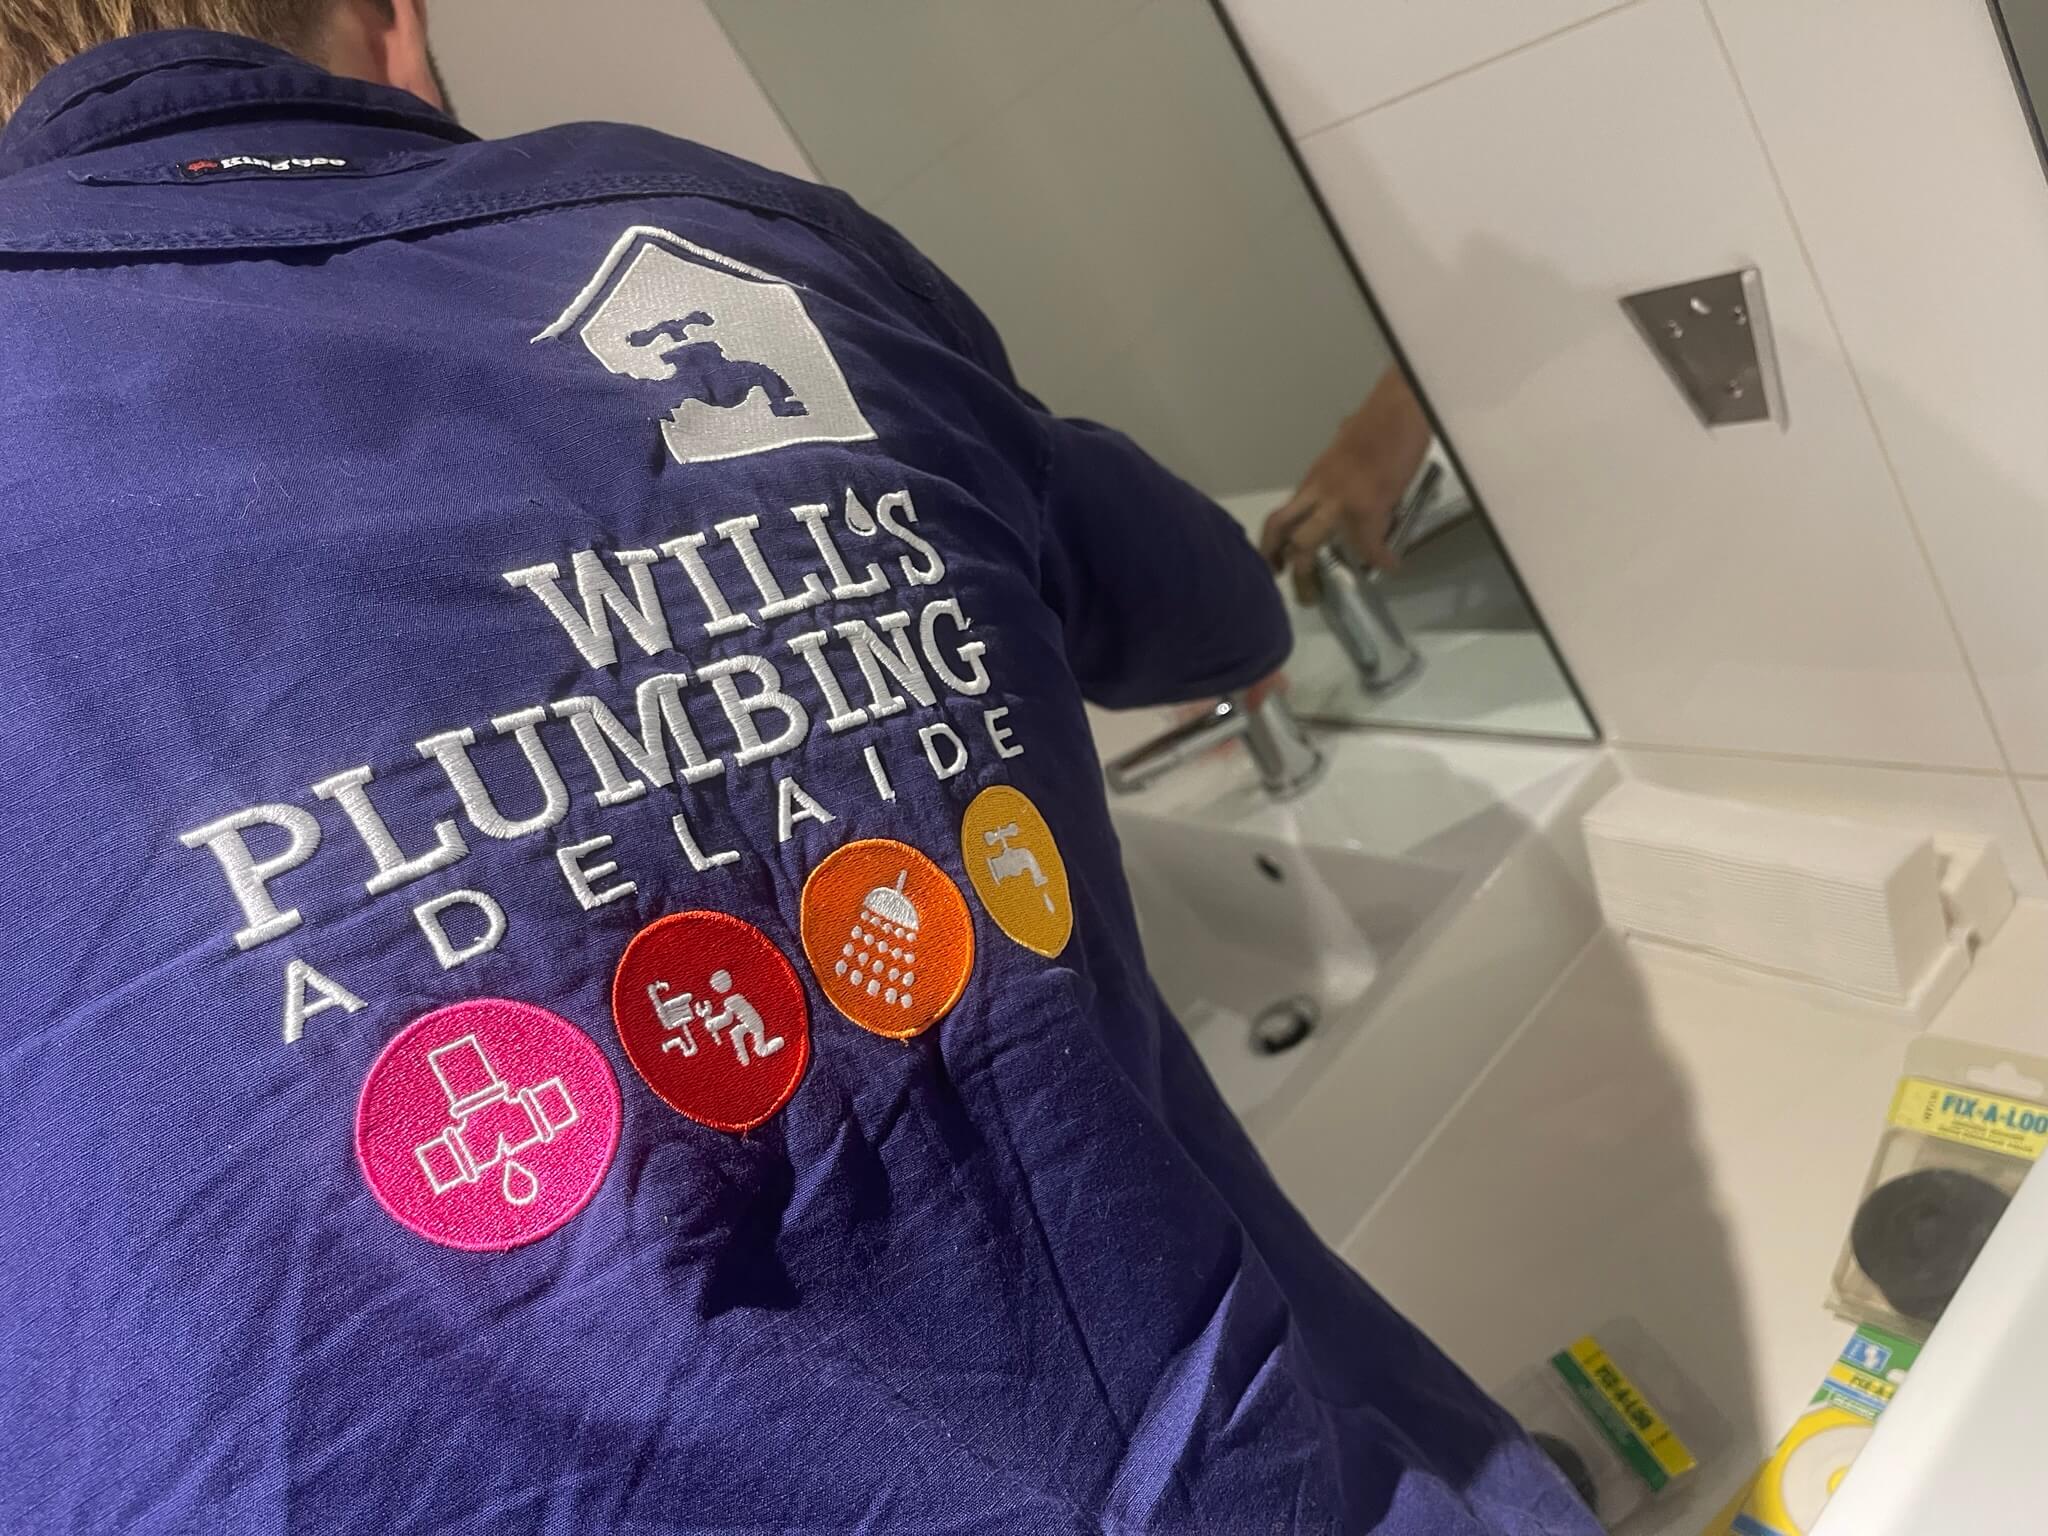 Plumbing Services in Lower Mitcham